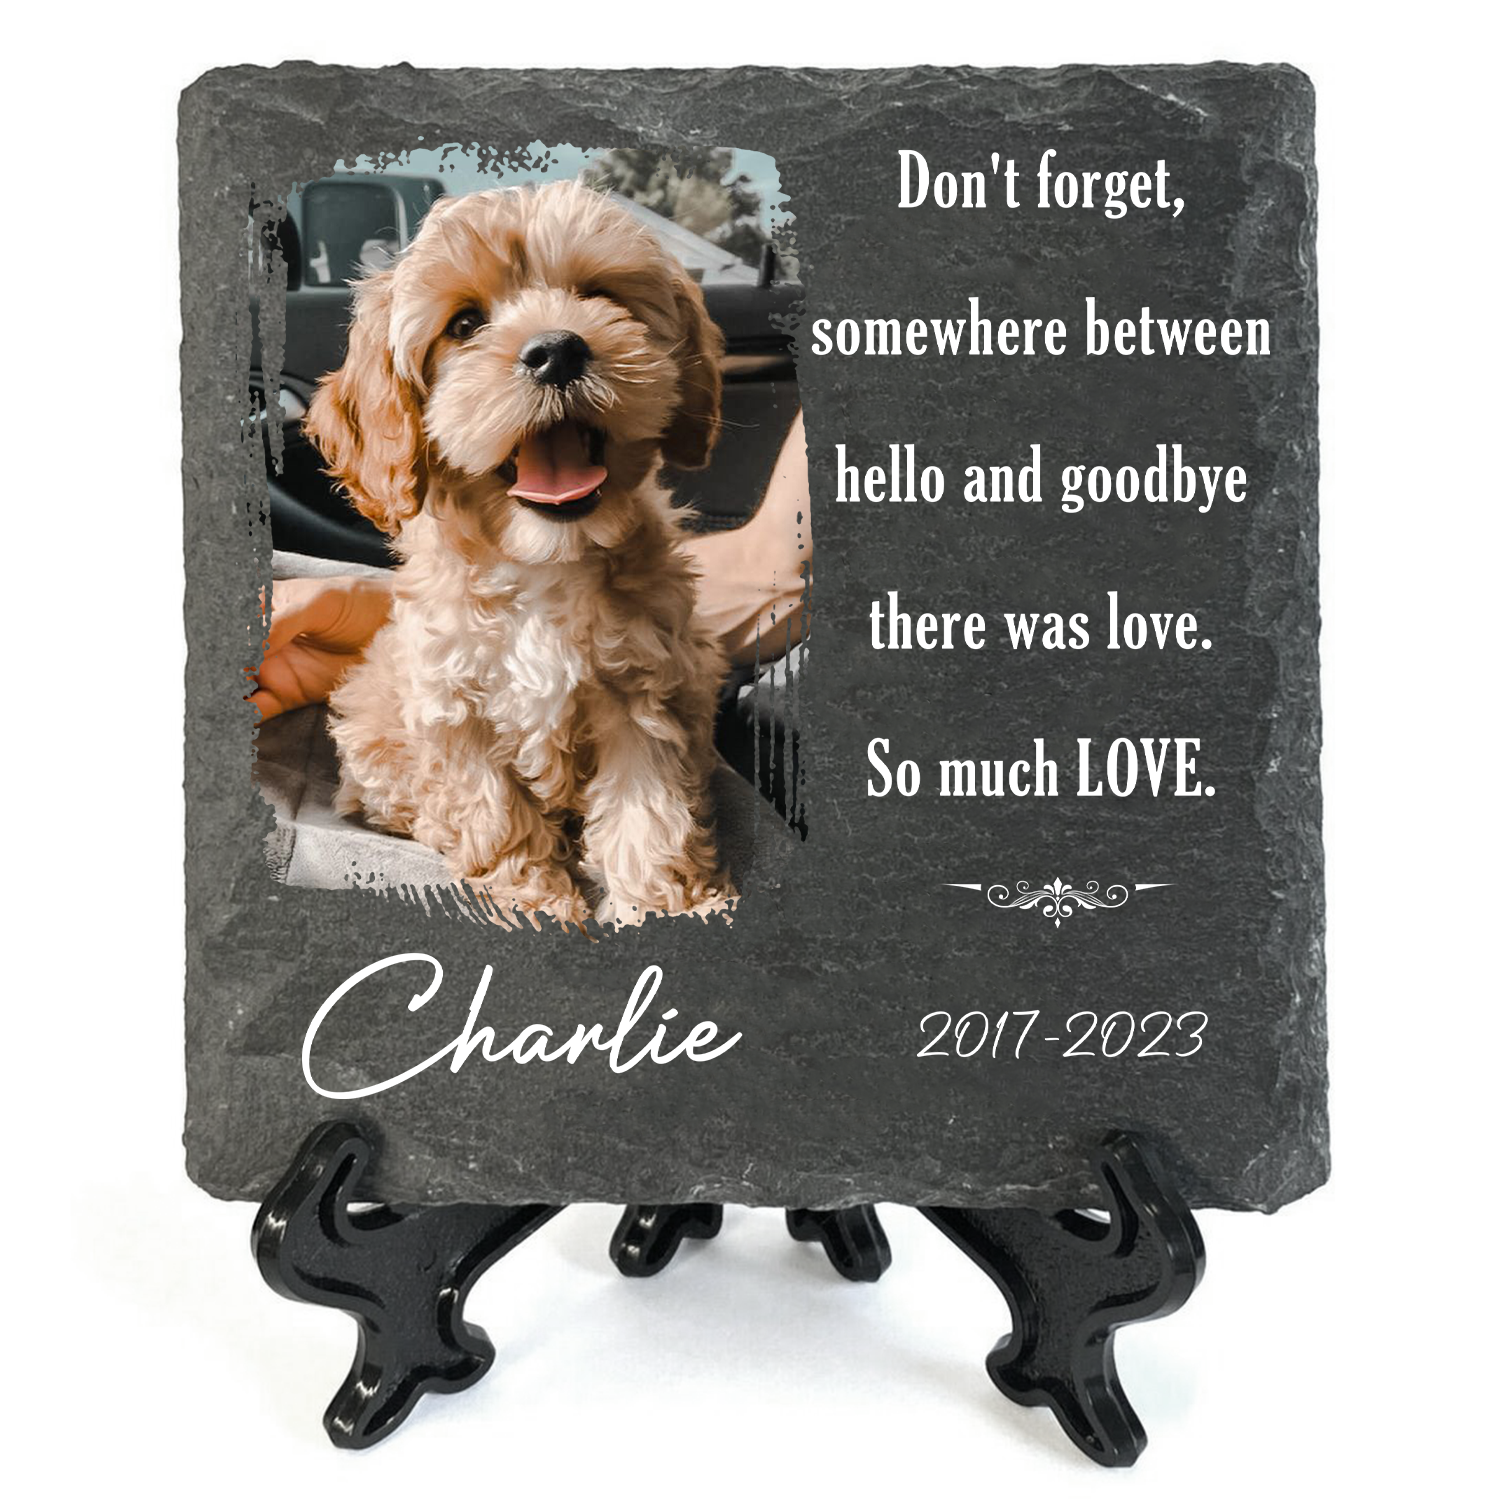 Dog Photo Don't Forget There Was Love Custom Dog Memorial Stone, Pet Memorial Gifts - Personalized Custom Memorial Tomstone